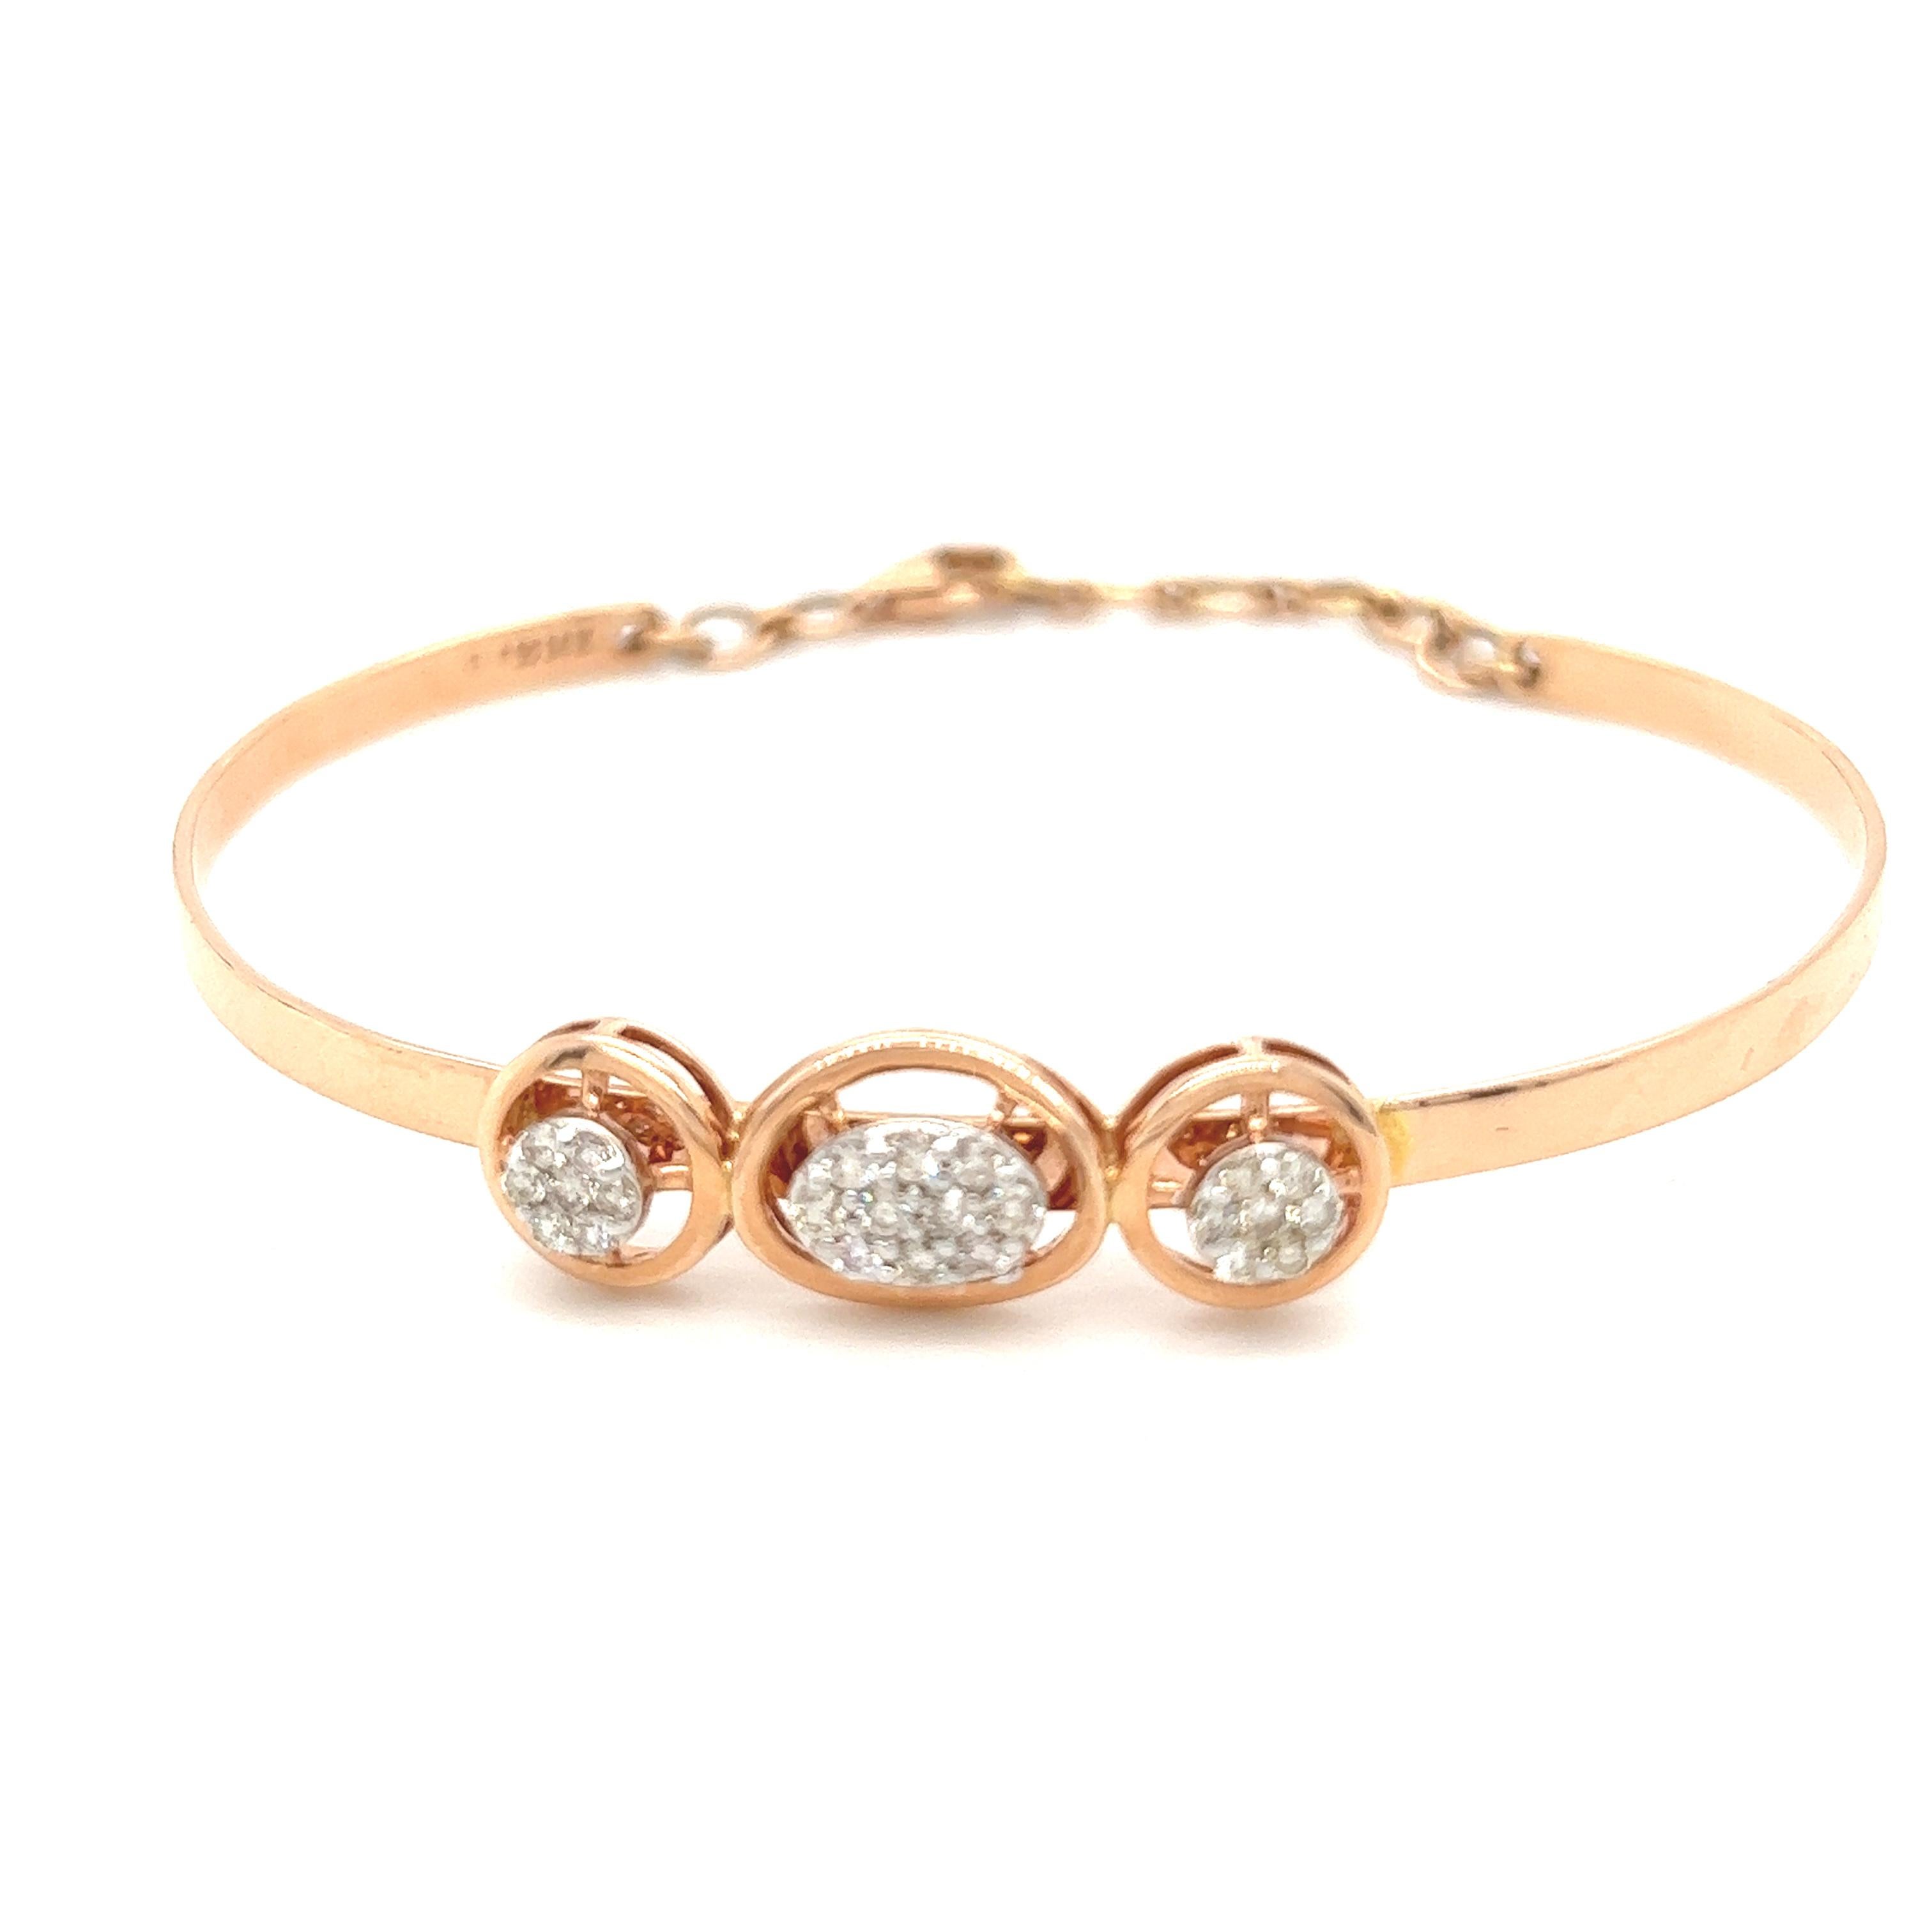 Add a feminine touch to your outfit, with this k18 rose gold bracelet featuring 0.18ct diamonds set in clusters. The precious bracelet will become this season's must have. Upgrade your look now and wear the stunning piece with other similar